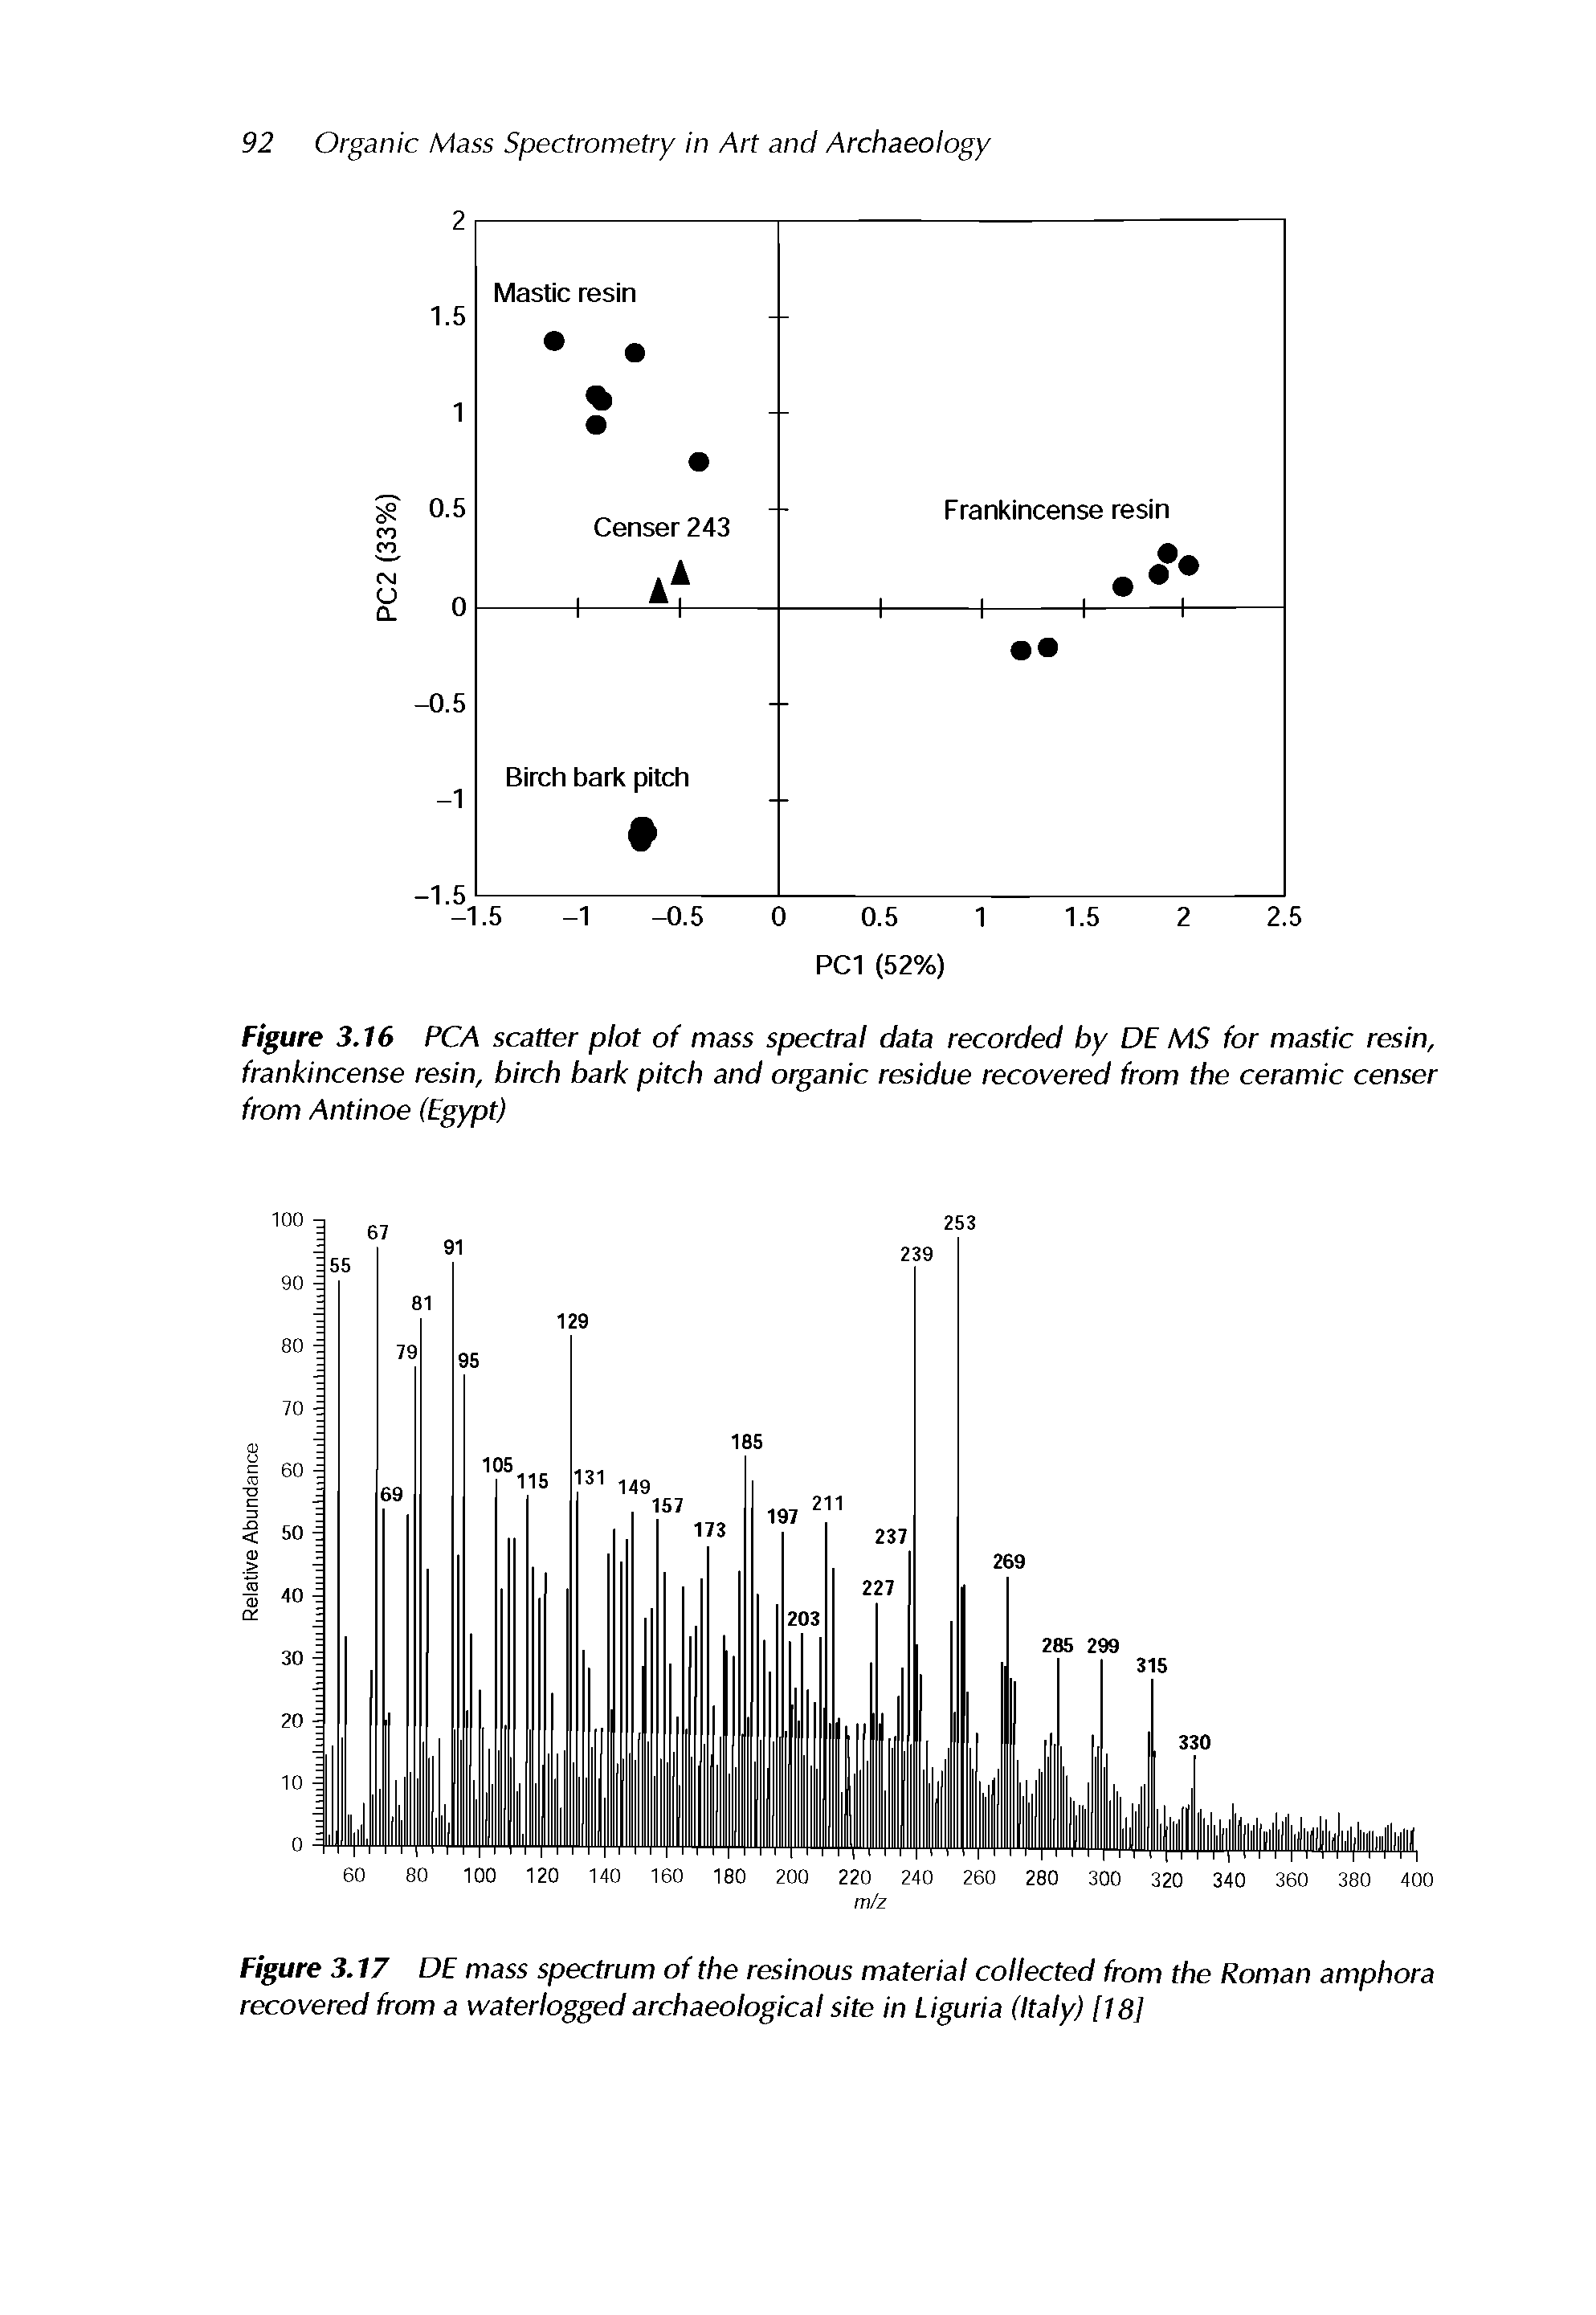 Figure 3.16 PCA scatter plot of mass spectral data recorded by DE MS for mastic resin, frankincense resin, birch bark pitch and organic residue recovered from the ceramic censer from Antinoe (Egypt)...